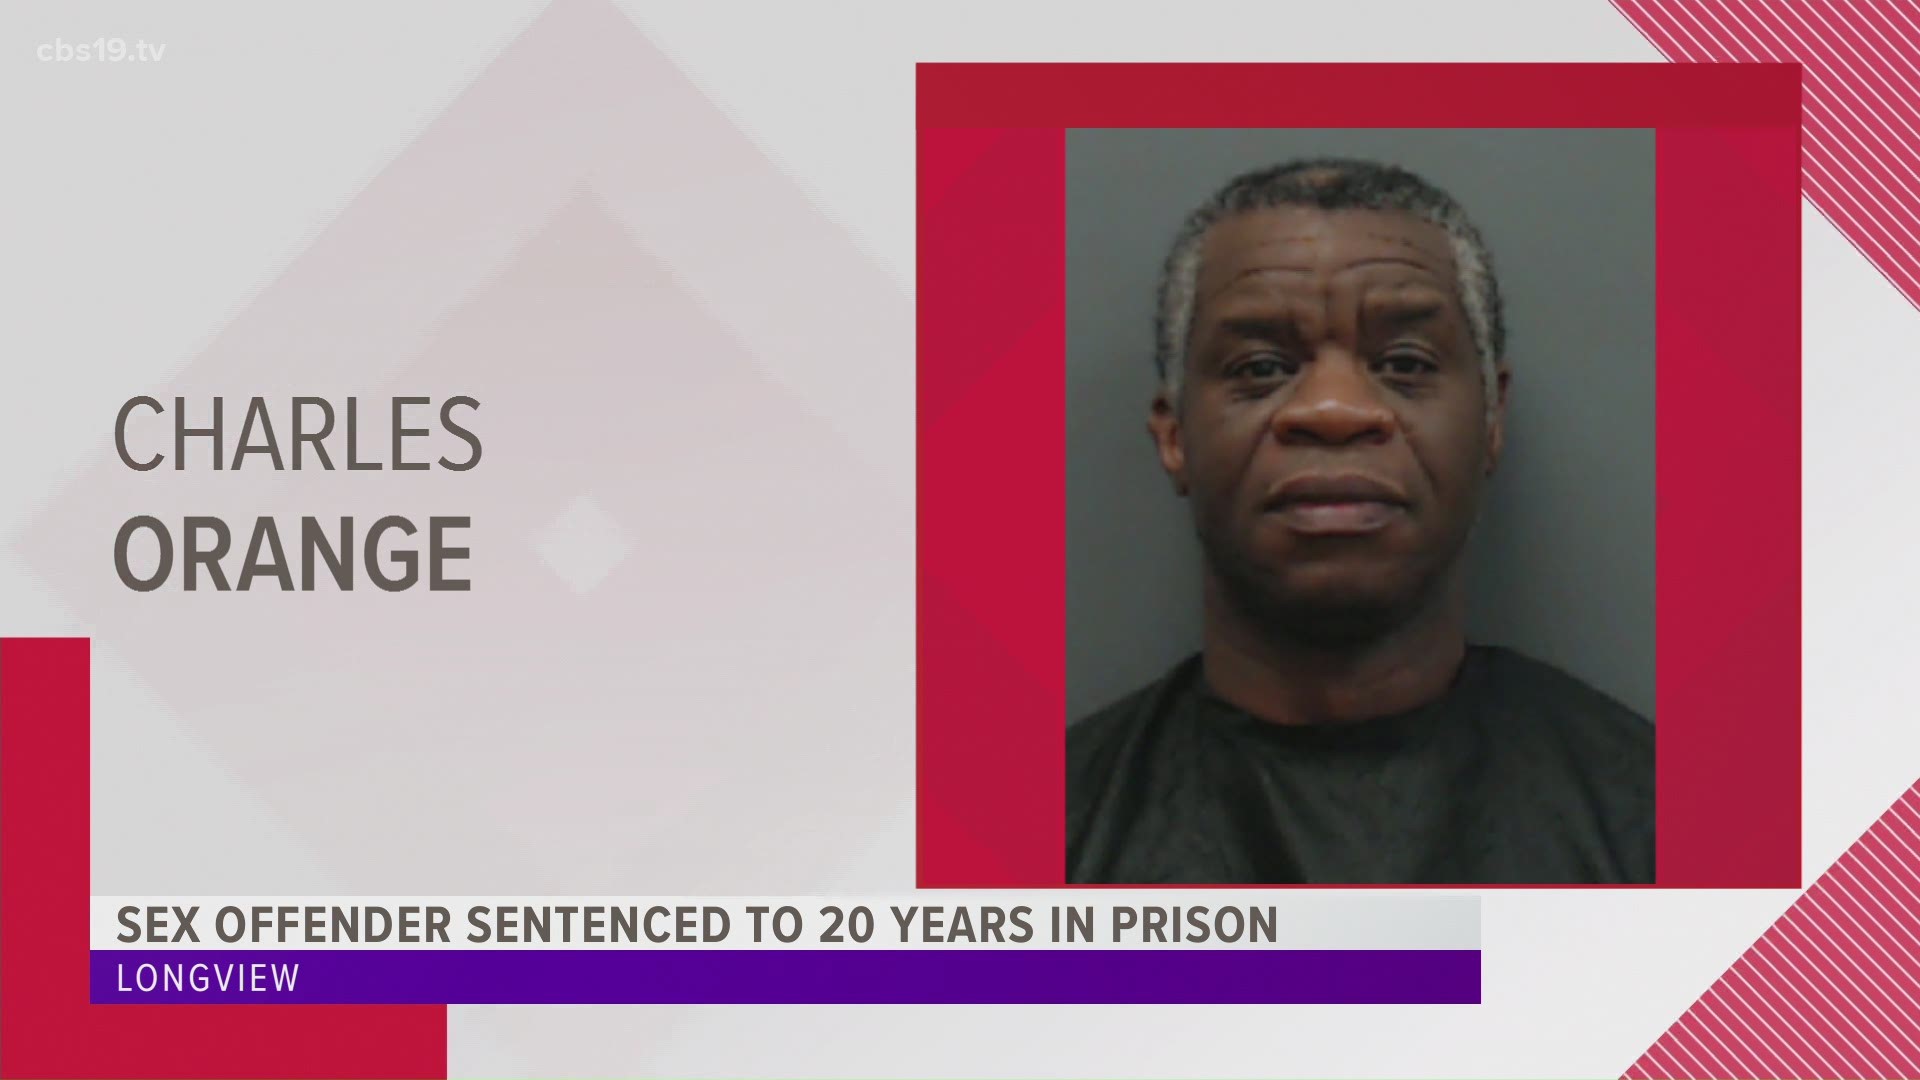 Longview sex offender sentenced to 20 years in prison in connection with  international child porn investigation | cbs19.tv